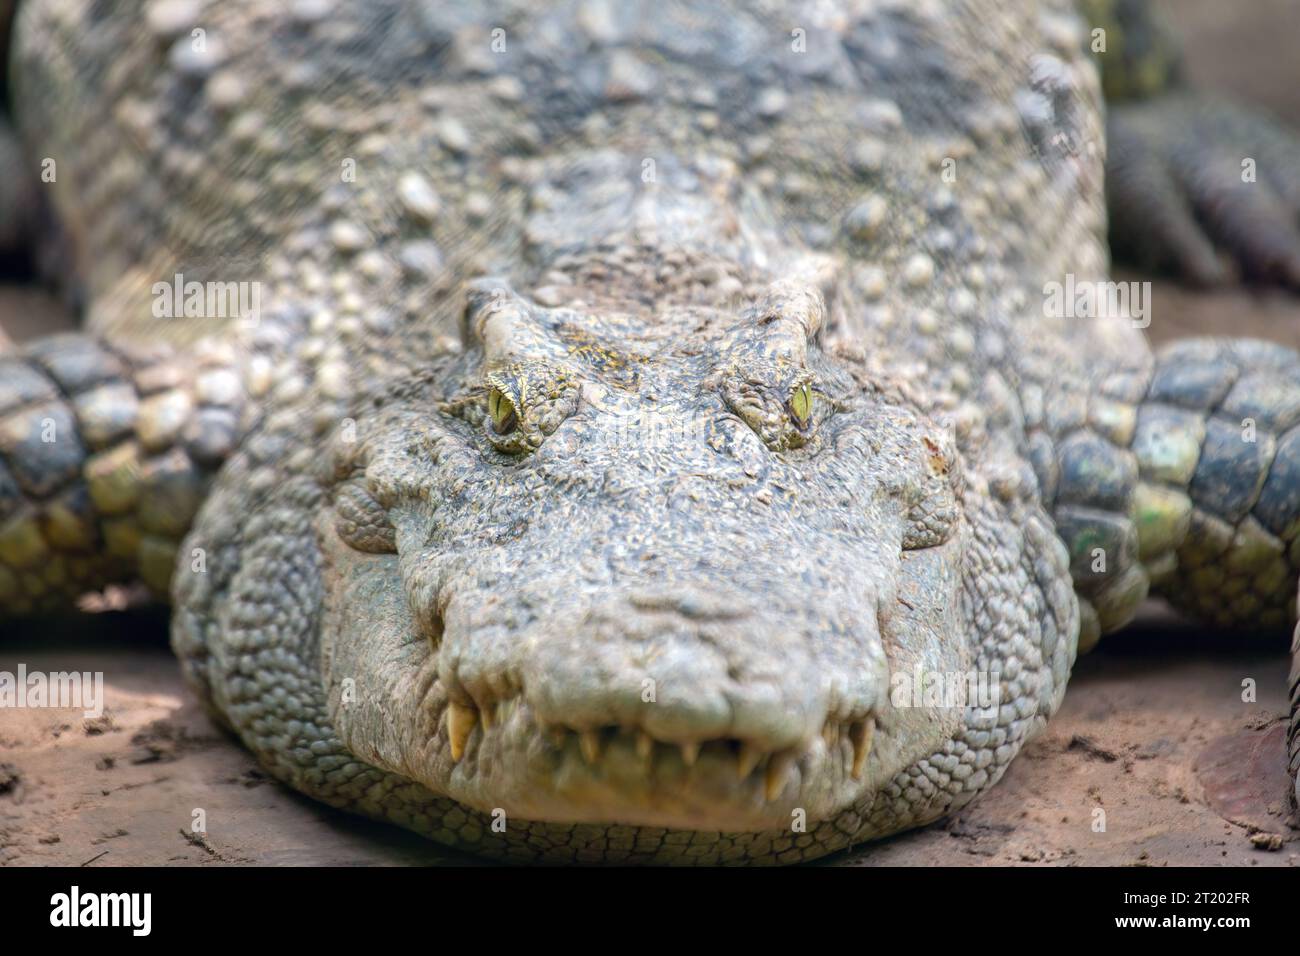 Crocodiles are large, semi-aquatic reptiles found in tropical and subtropical regions around the world. They are known for their long, slender bodies, Stock Photo